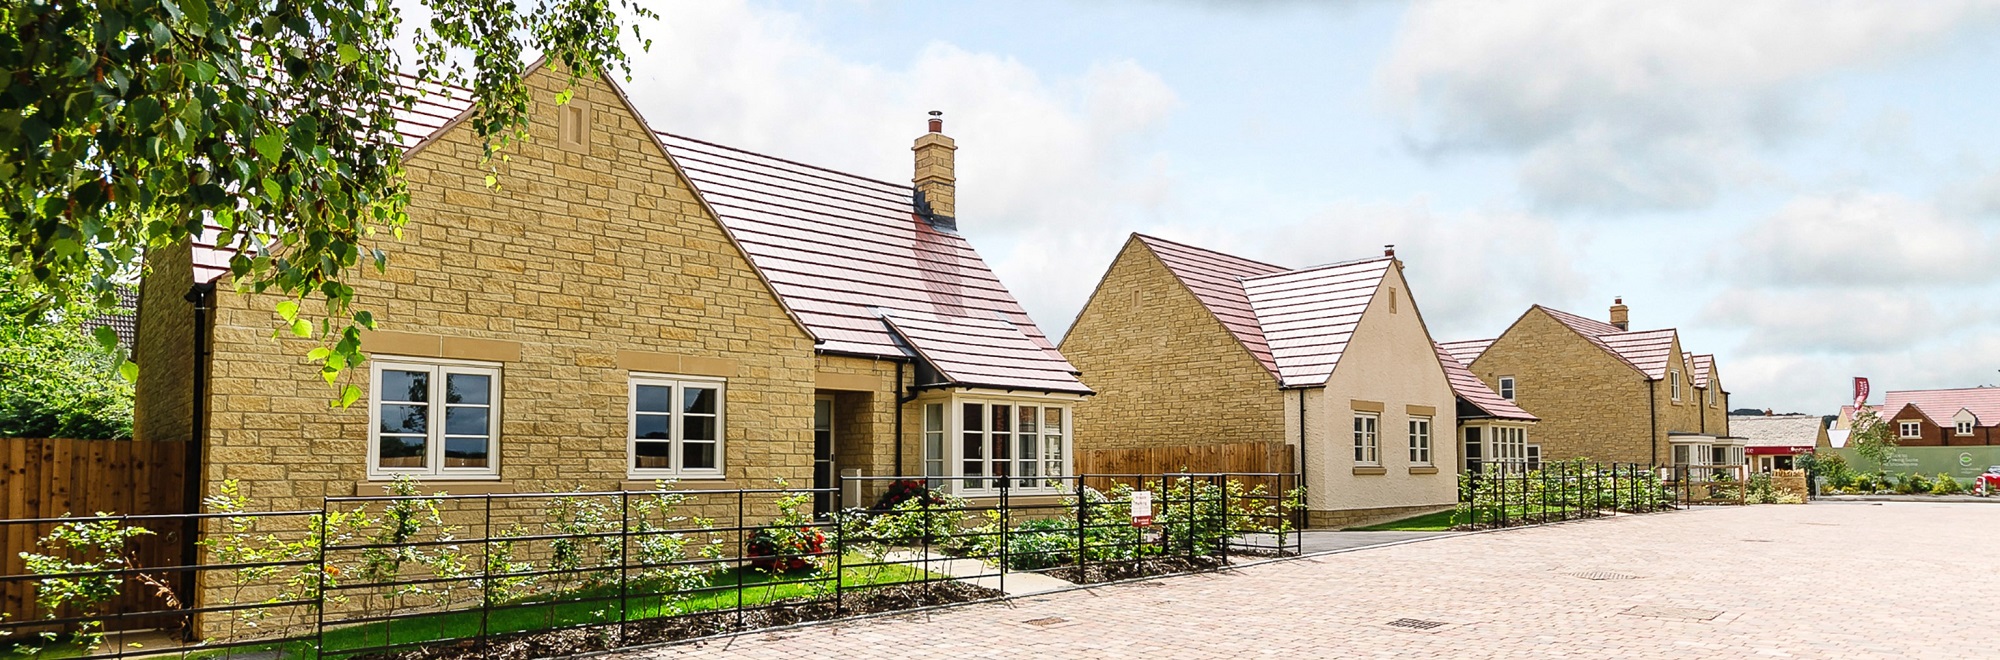 Bungalows at Mickleton in the Cotswolds